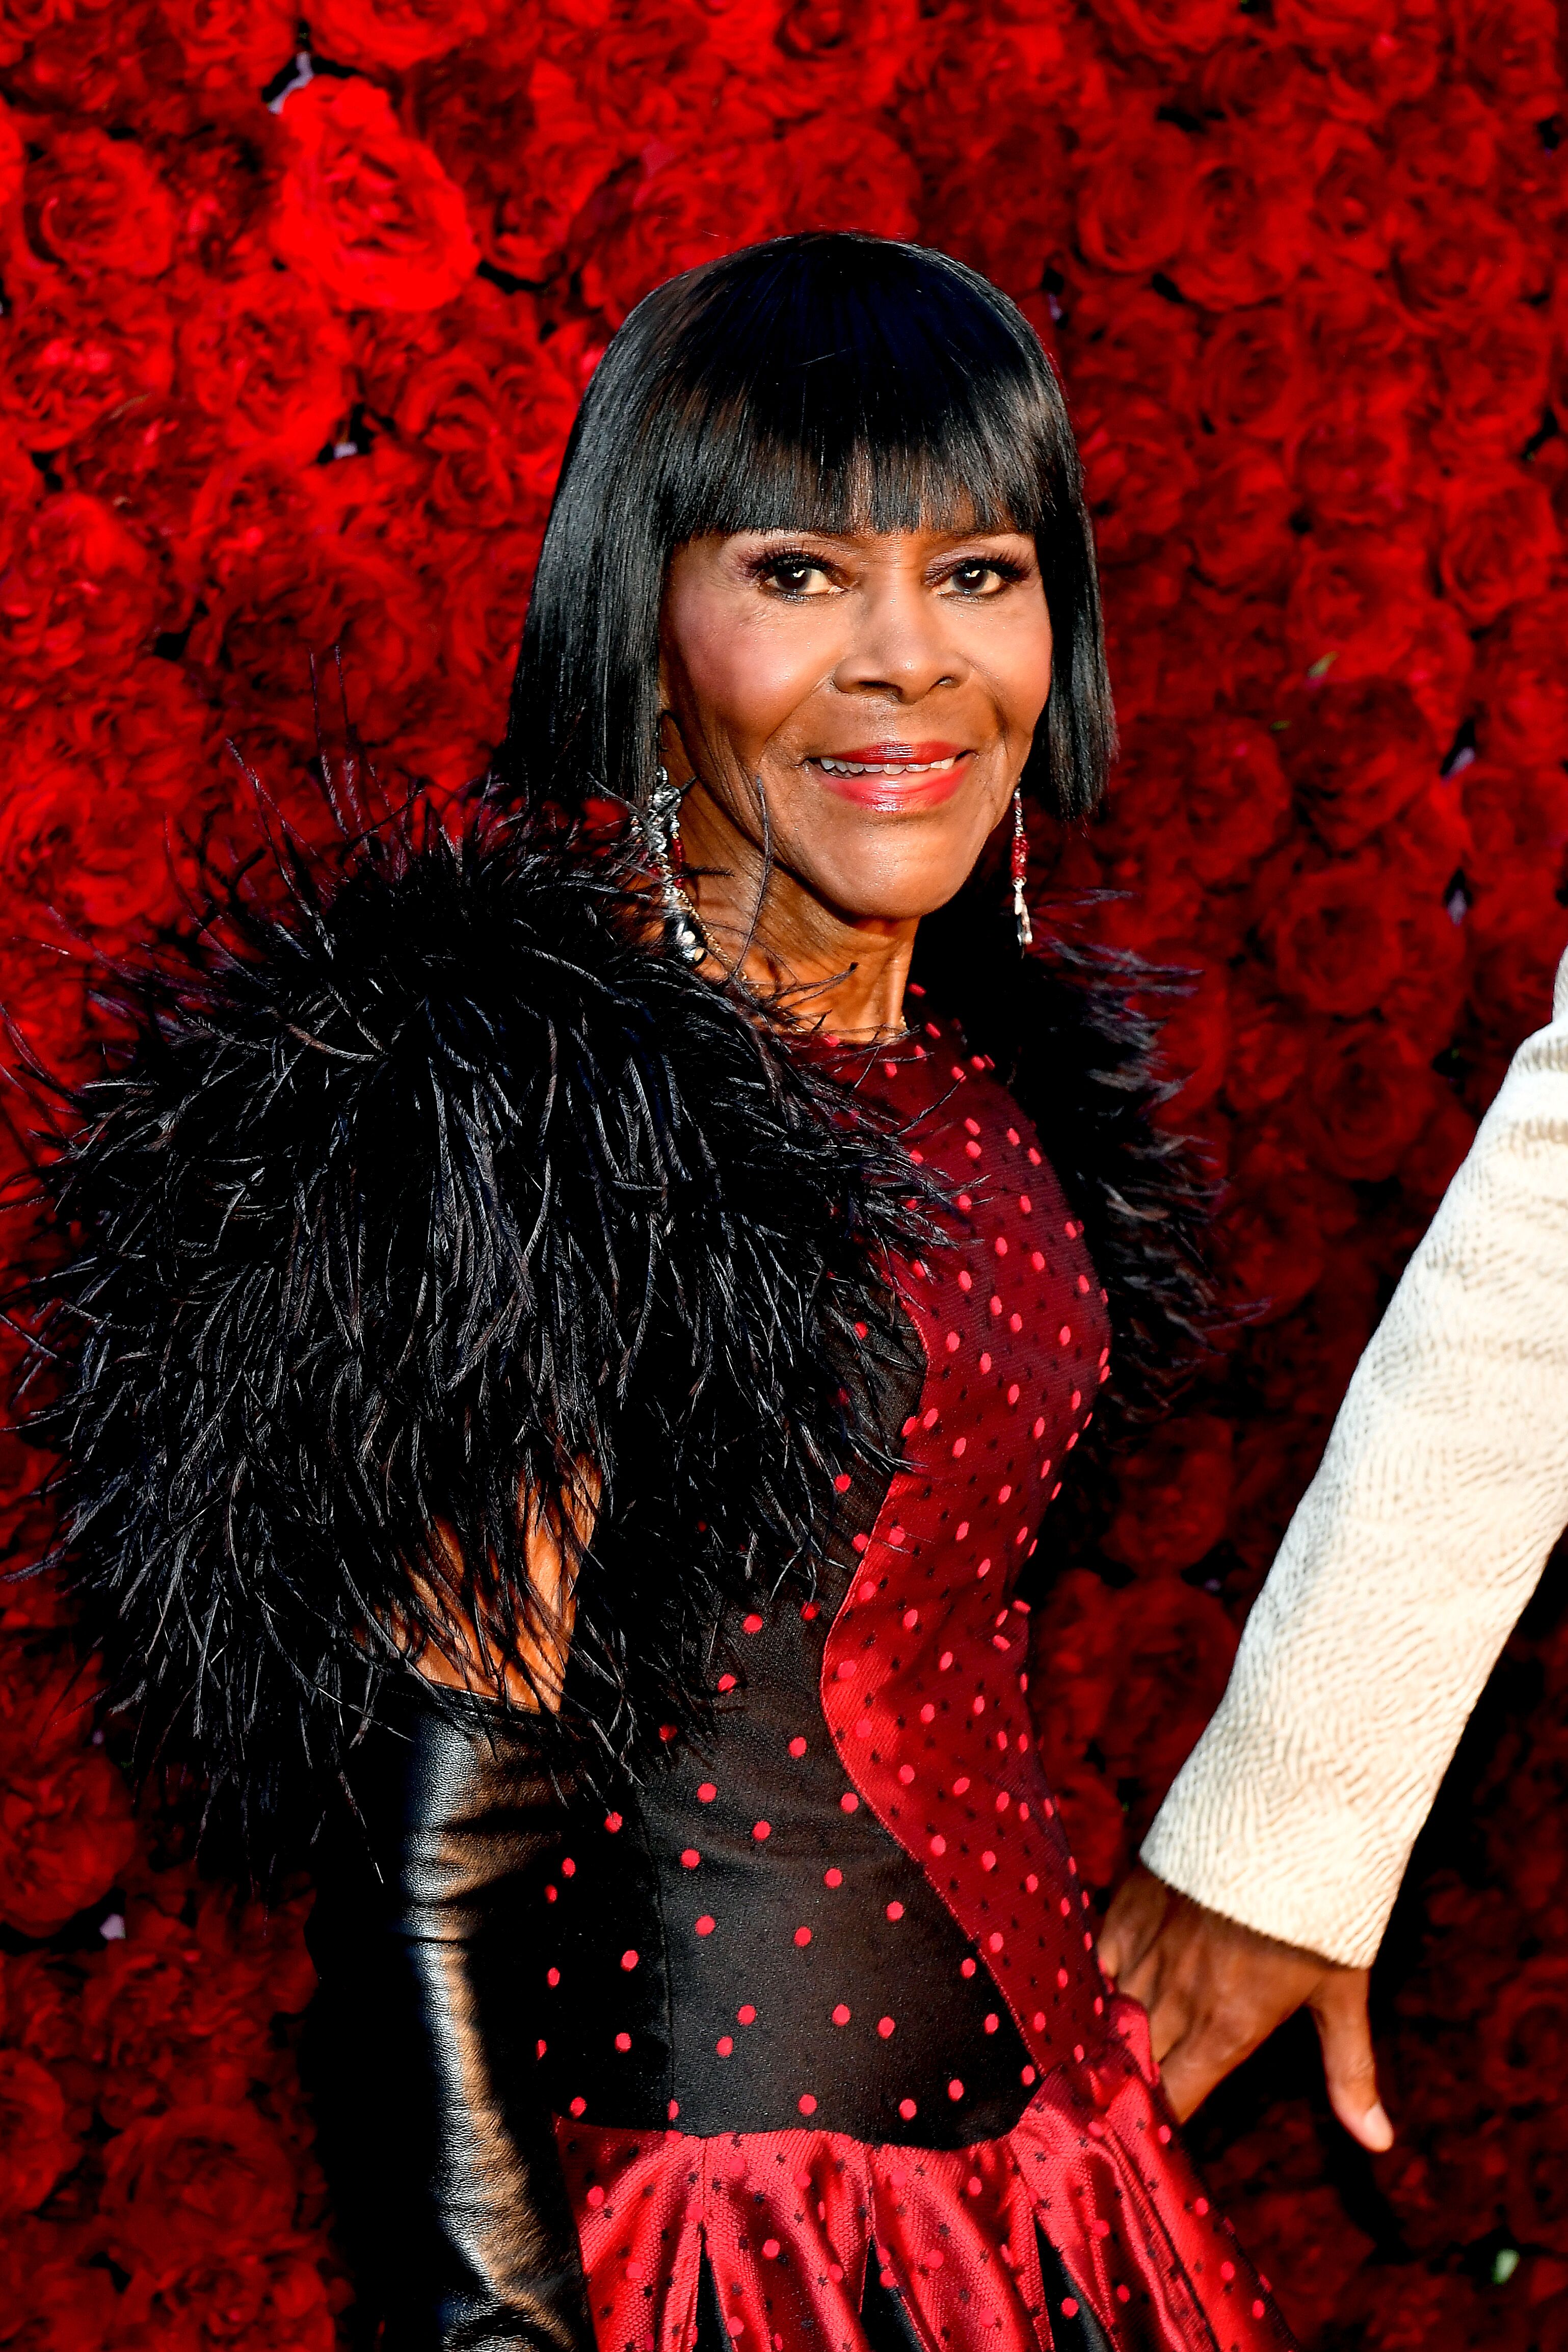 Cicely Tyson attends the grand opening gala of Tyler Perry Studios on October 5, 2019 in Atlanta, Georgia. | Photo: Getty Images